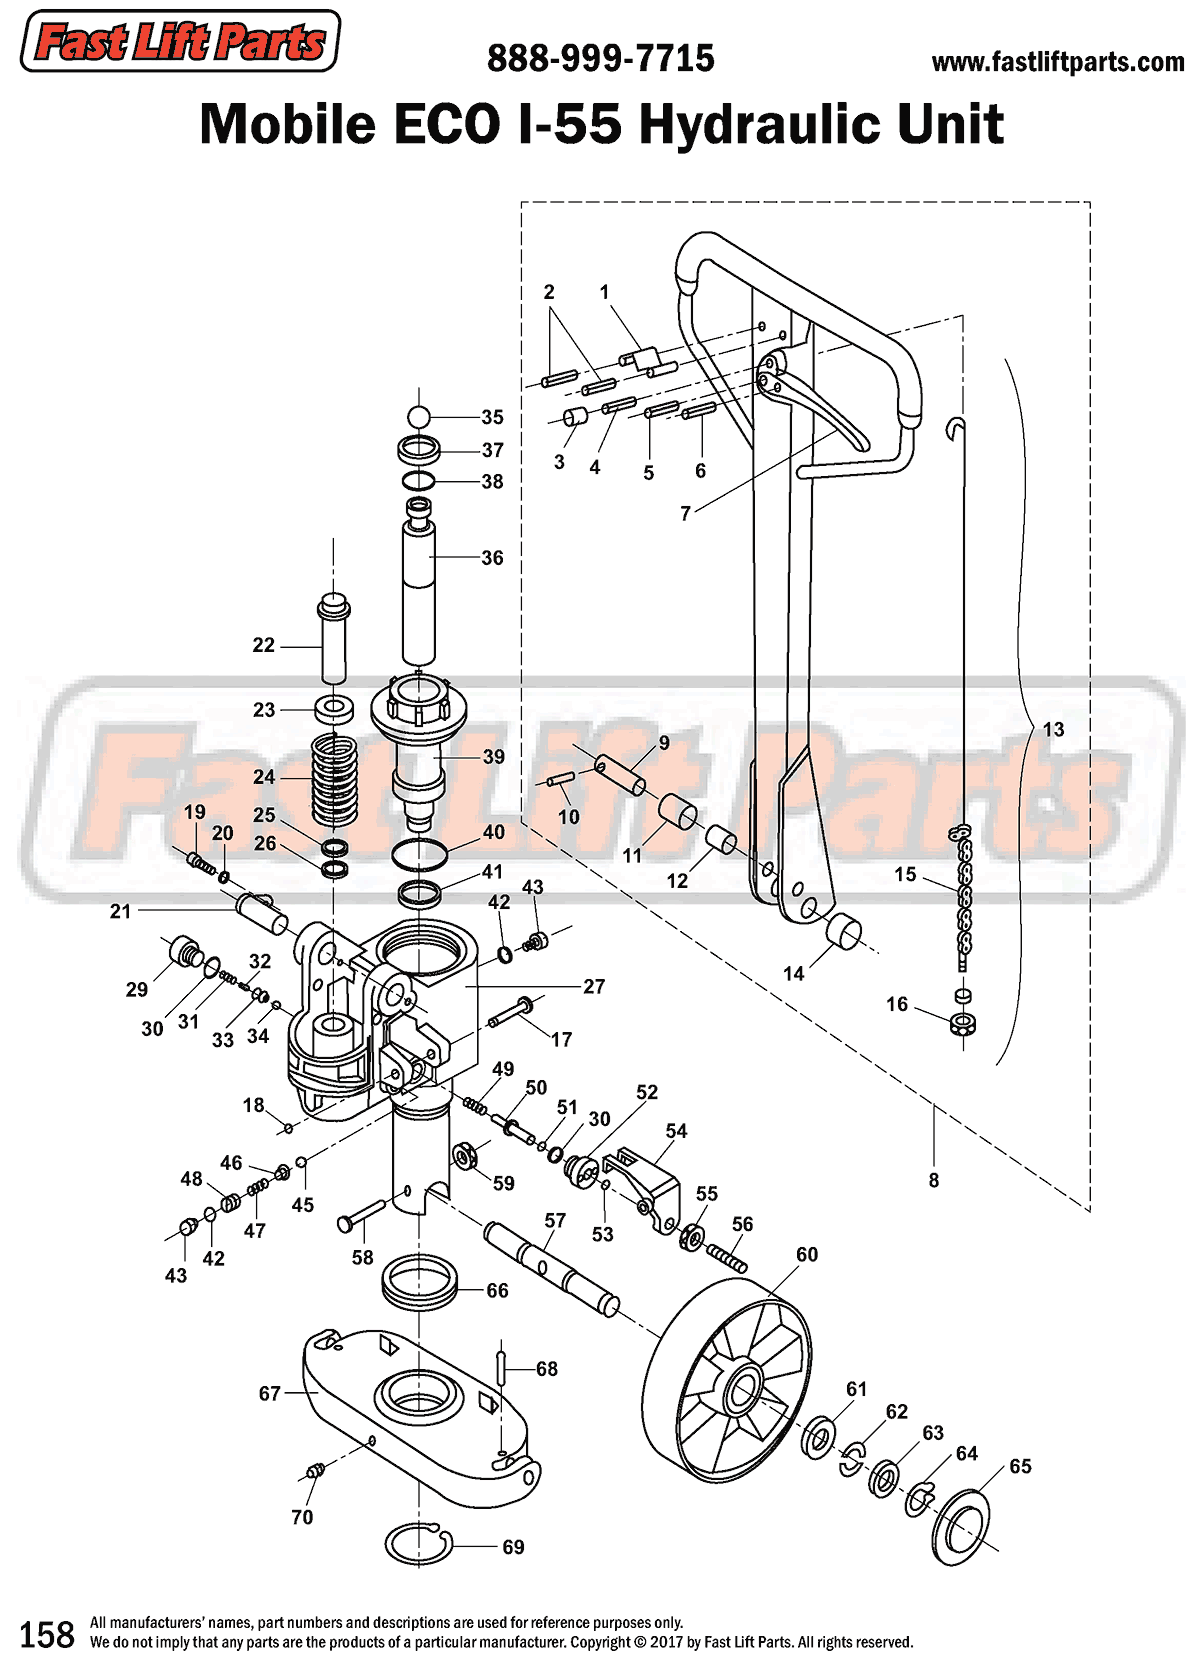 Mobile ECO I-55 Hydraulic Unit Line Drawing